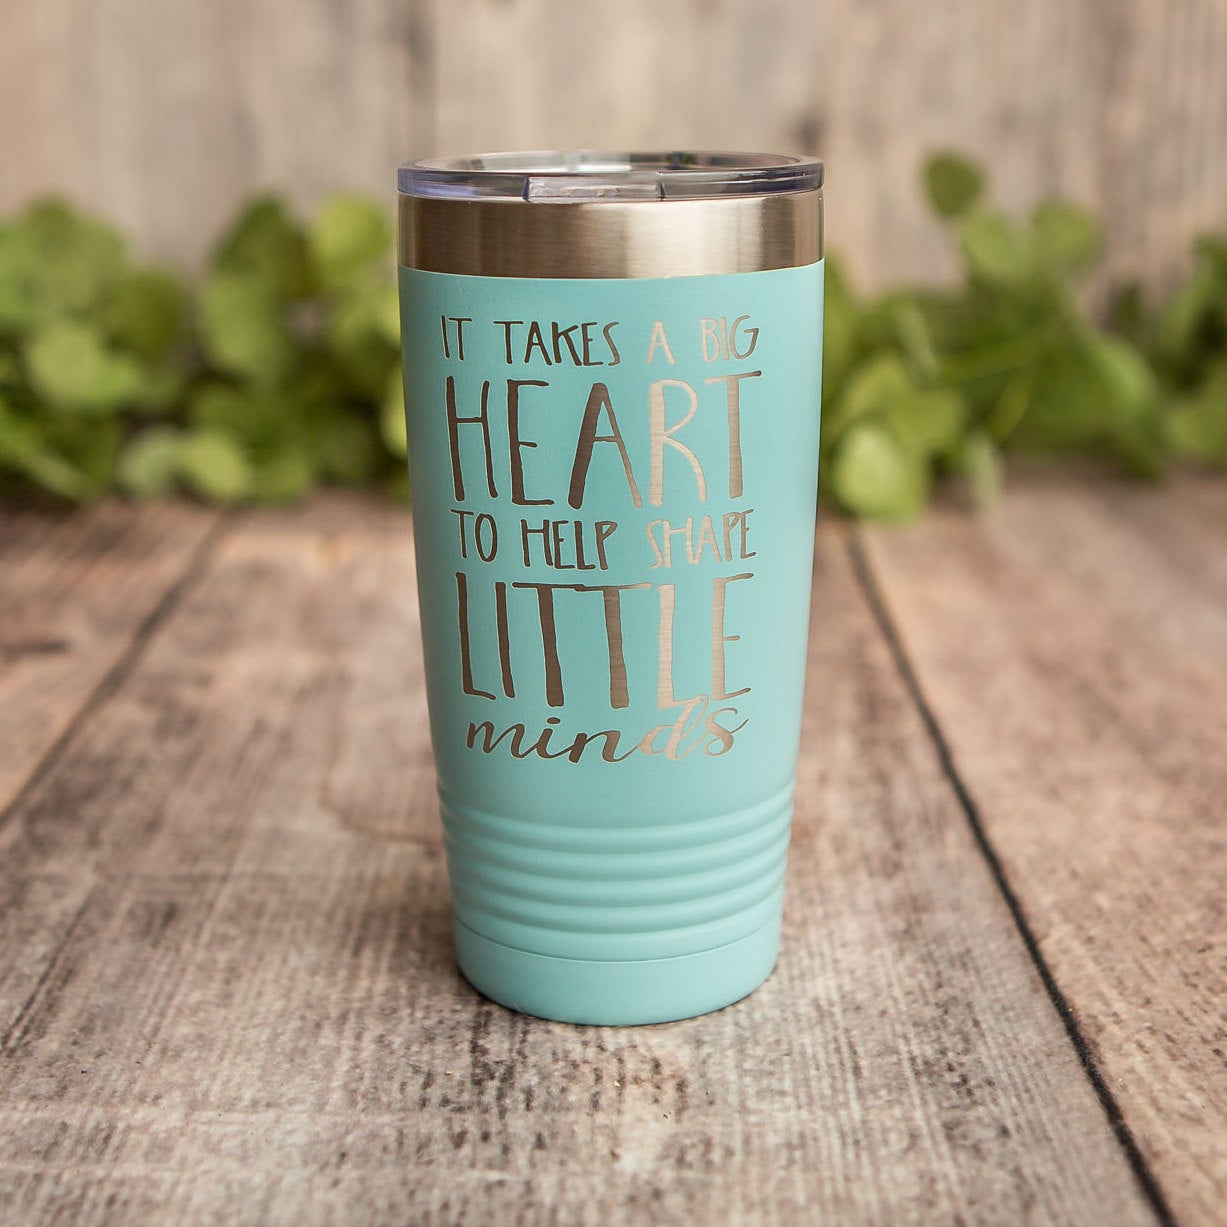 https://3cetching.com/wp-content/uploads/2020/09/it-takes-a-big-heart-to-help-shape-little-minds-engraved-stainless-steel-tumbler-insulated-mug-teacher-gift-5f5fc0b6.jpg